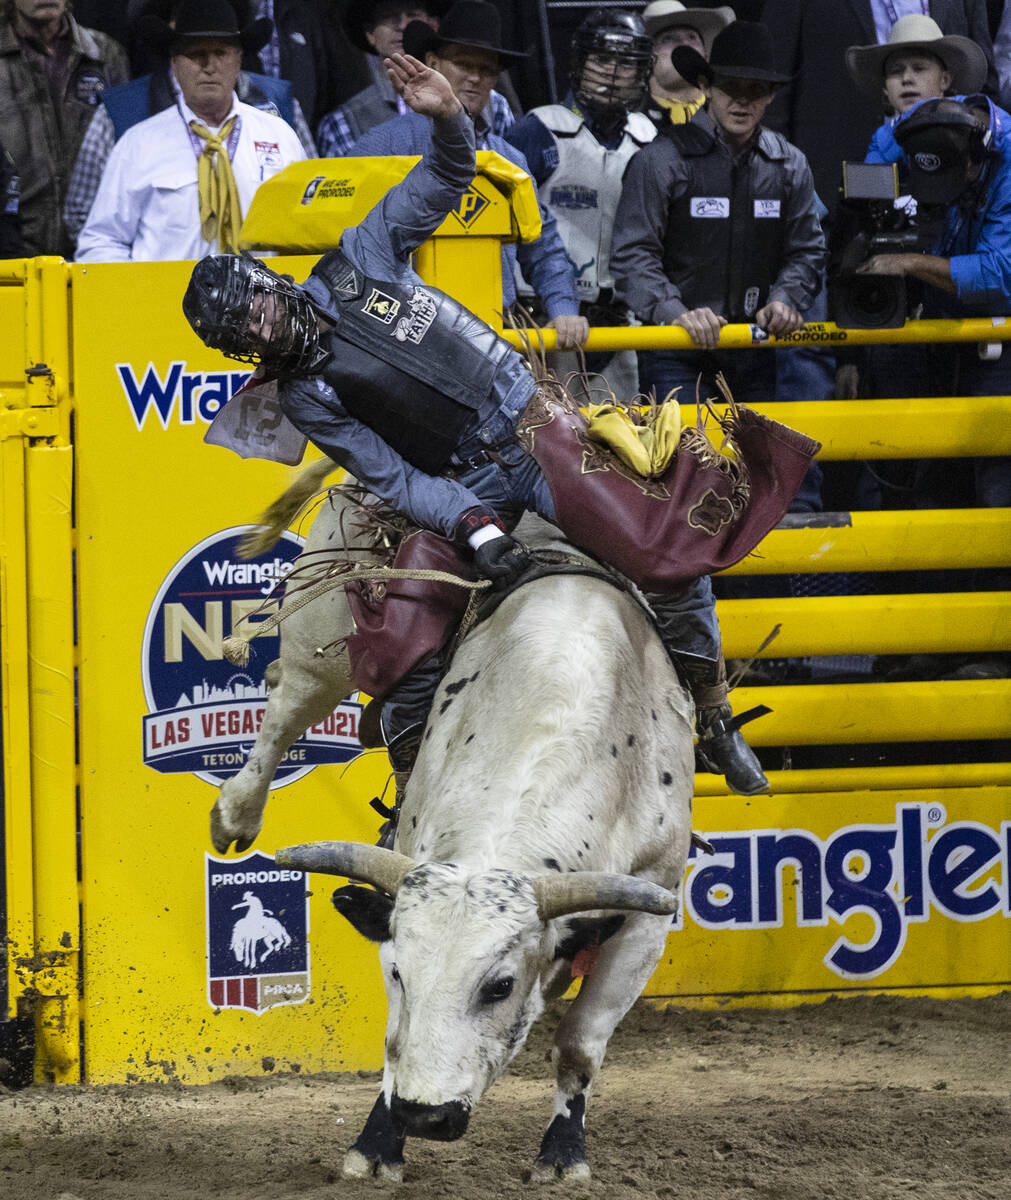 Dustin Boquet of Bourg, La., rides Hous Bad News in Bull Riding during the fourth round of the ...